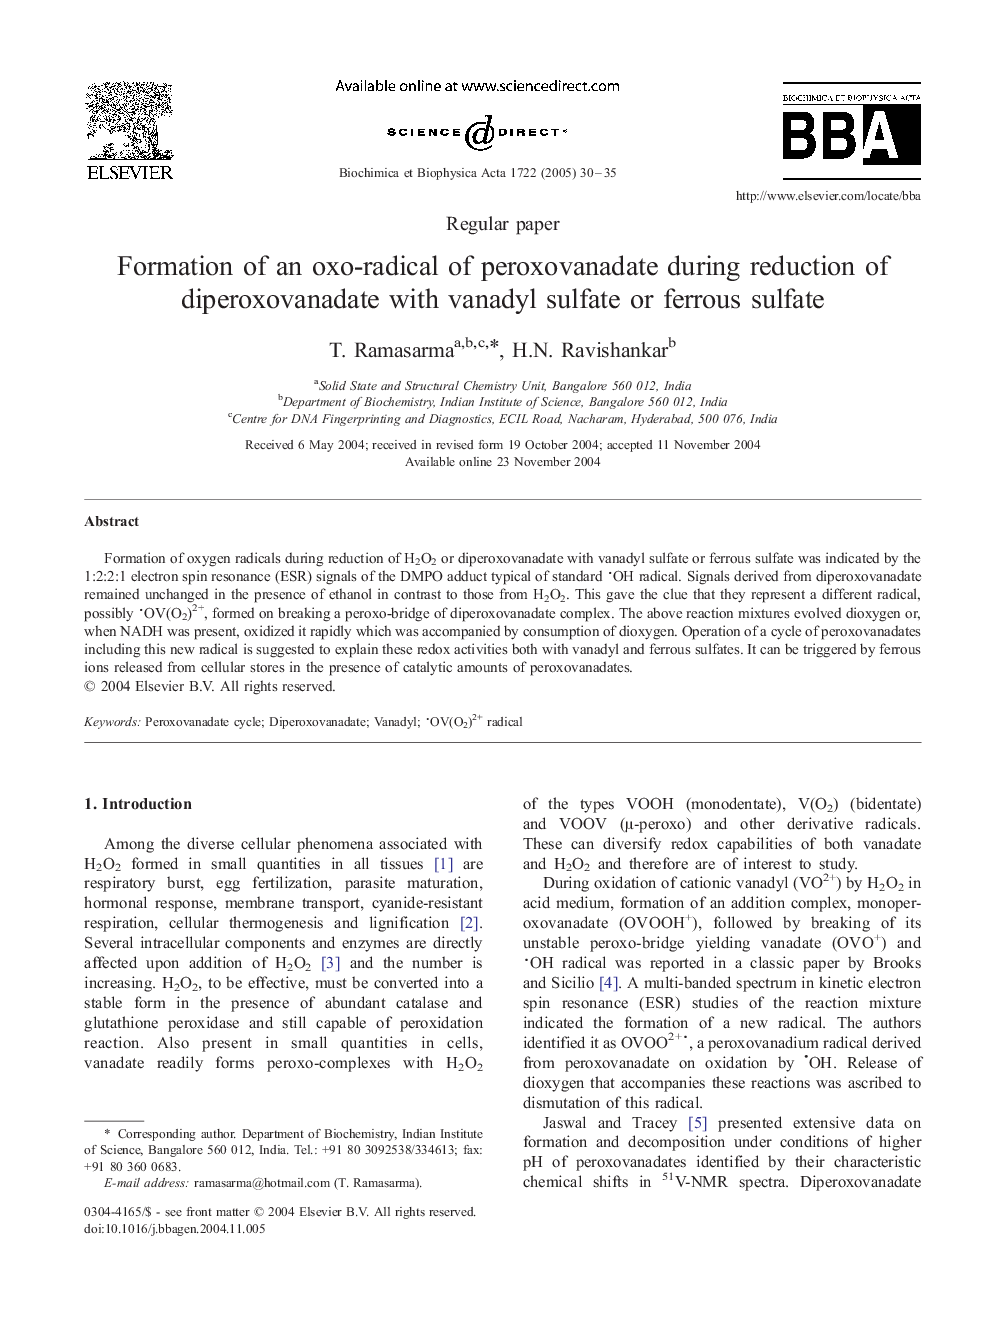 Formation of an oxo-radical of peroxovanadate during reduction of diperoxovanadate with vanadyl sulfate or ferrous sulfate